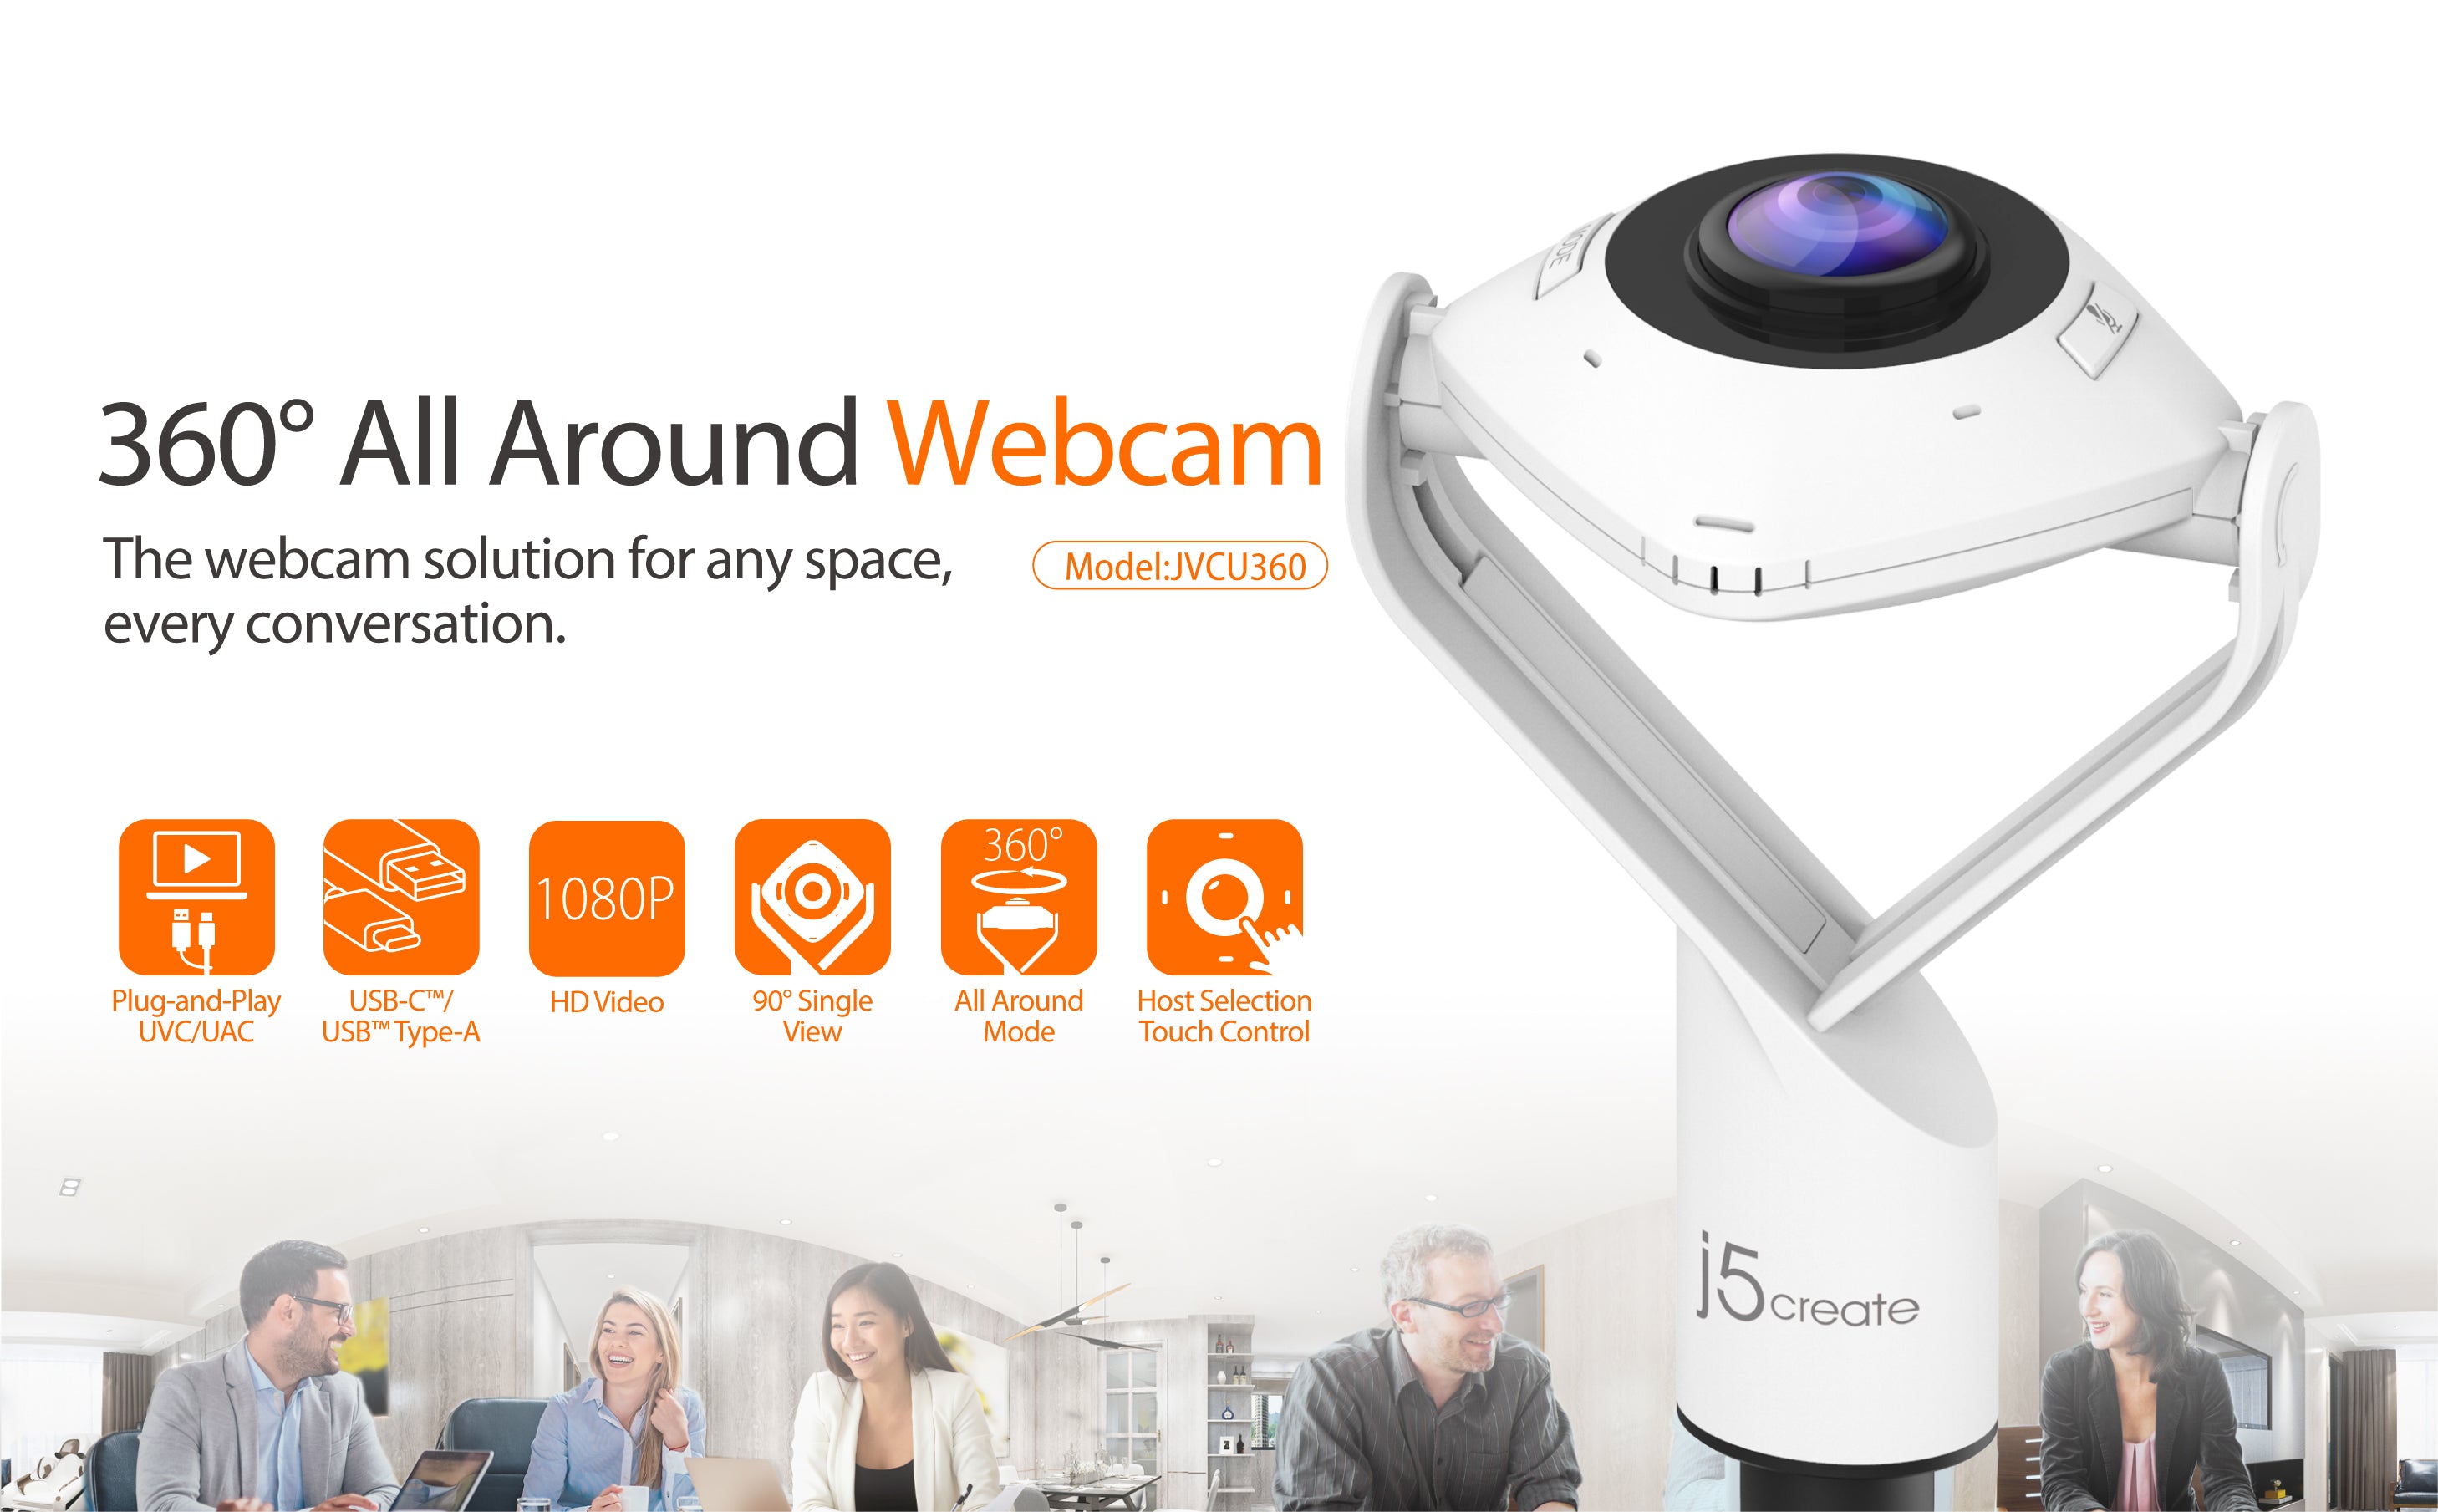 The Webcam solution for any Space